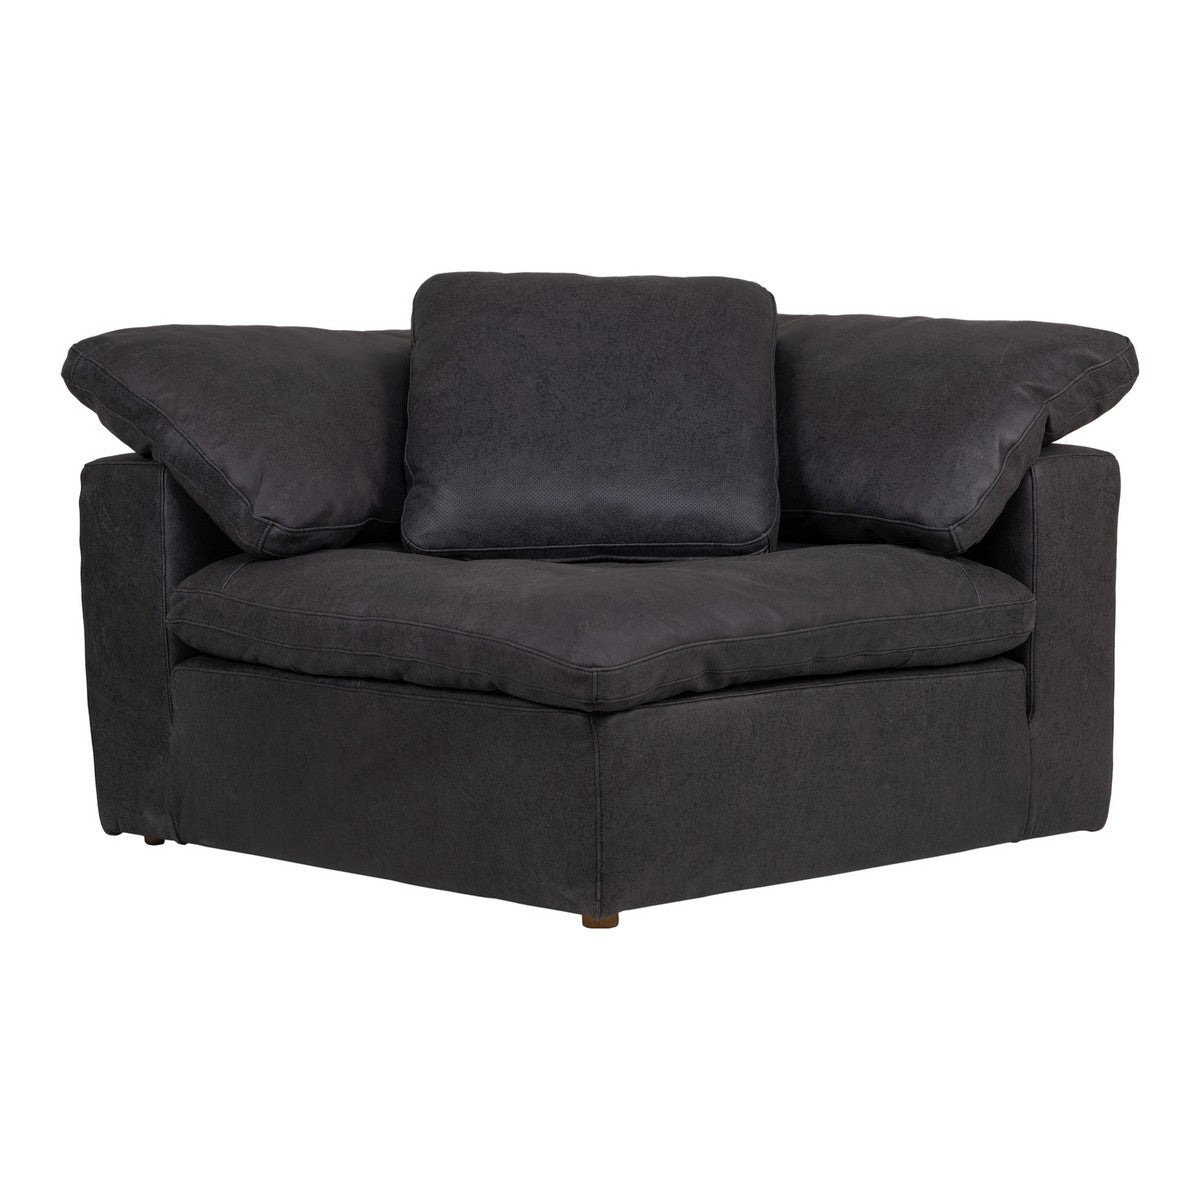 Moe's Home Collection Clay Corner Chair Nubuck Leather Black - YJ-1004-02 - Moe's Home Collection - Corner Chairs - Minimal And Modern - 1